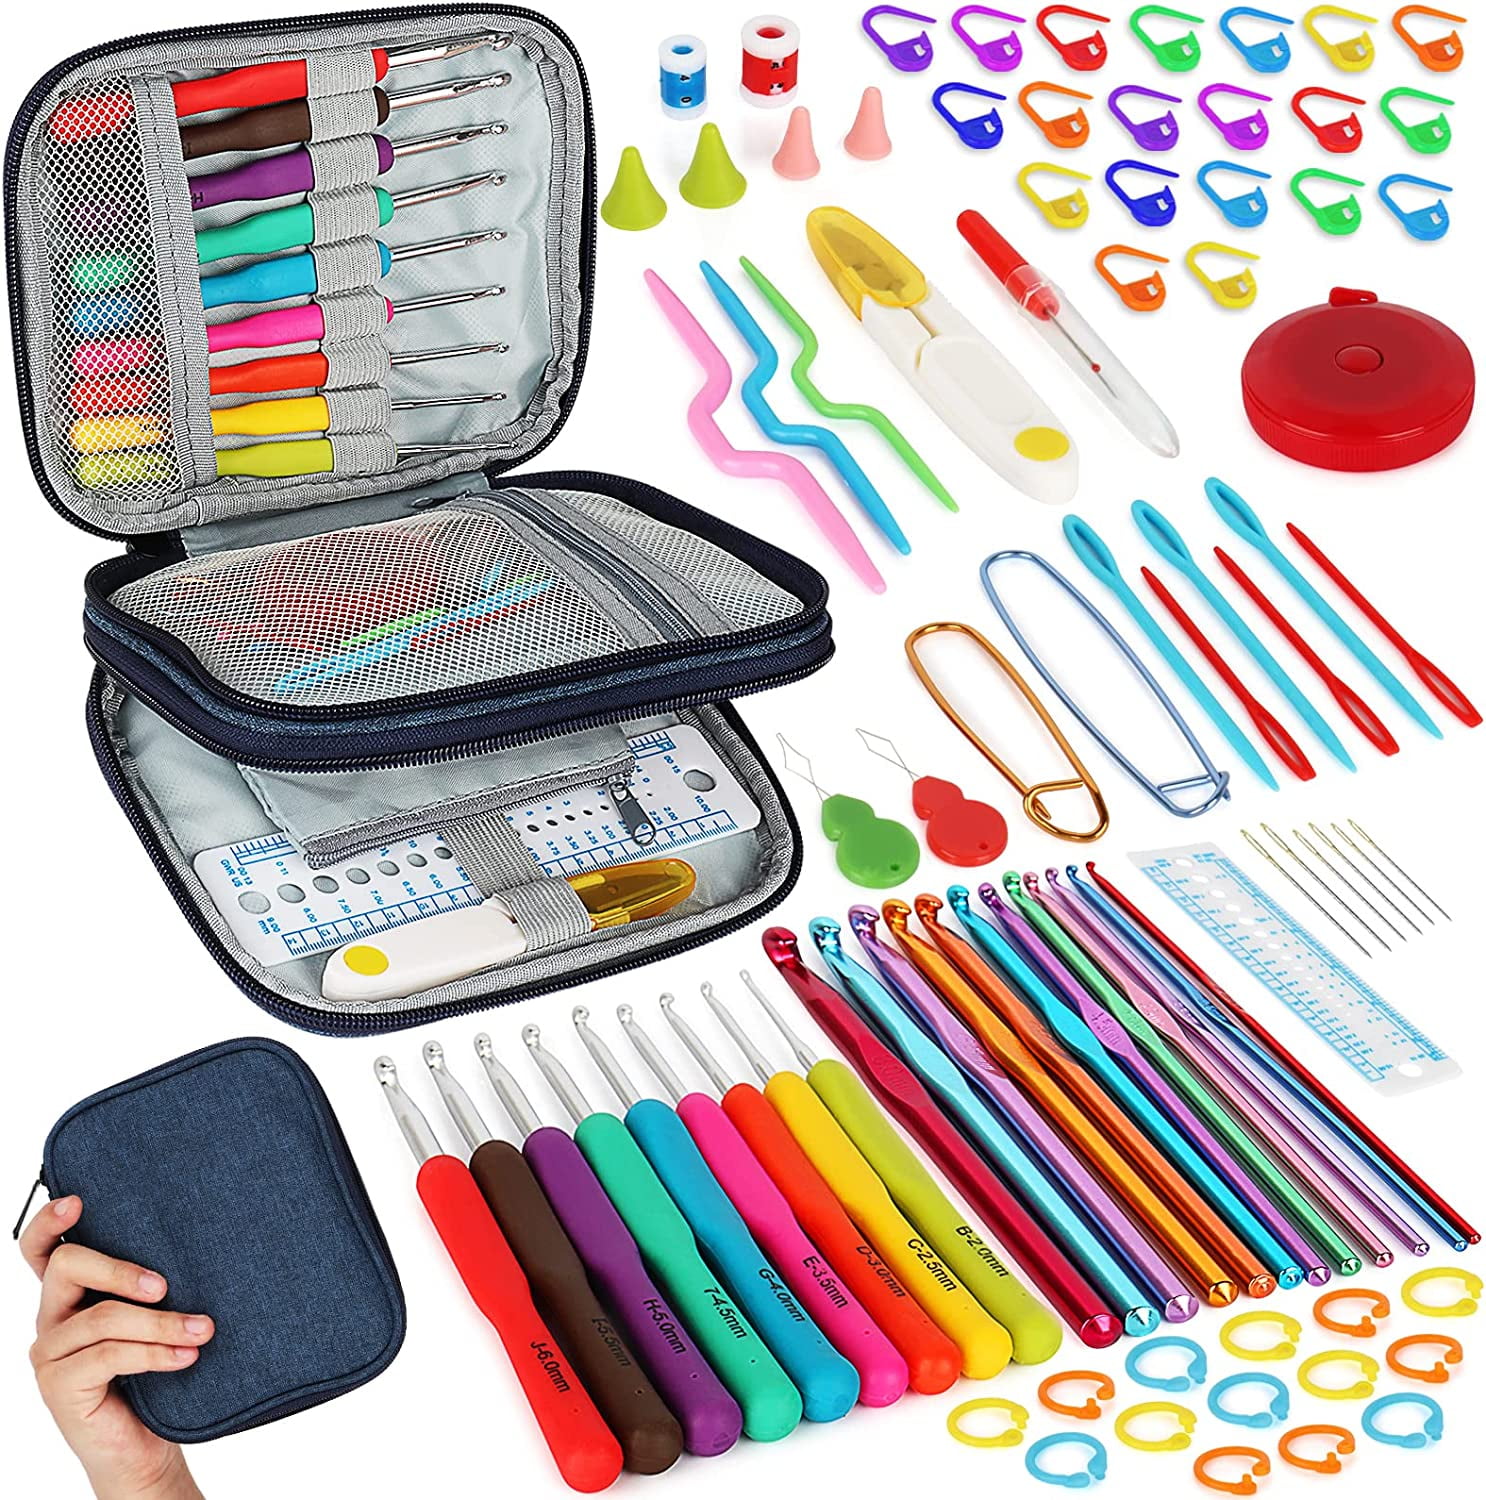 Sewing Cotton Storage Crochet Hook Kit With Storage Bag Weaving